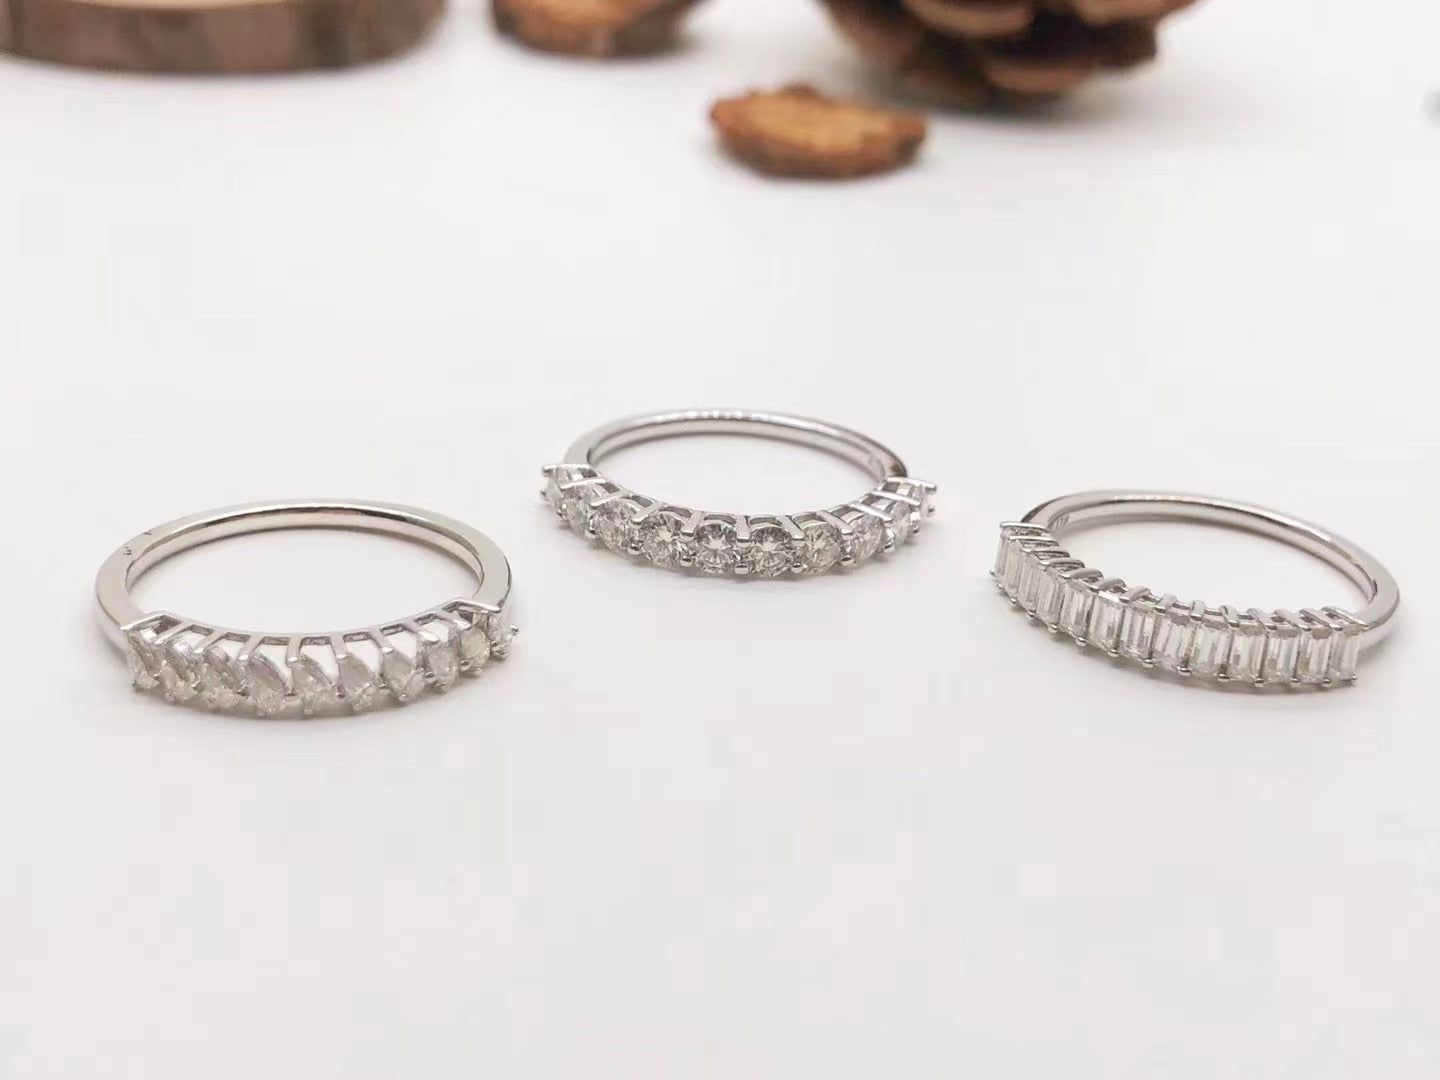 3 Silver wedding rings set with several vertical pear, round and emerald cut clear gems.